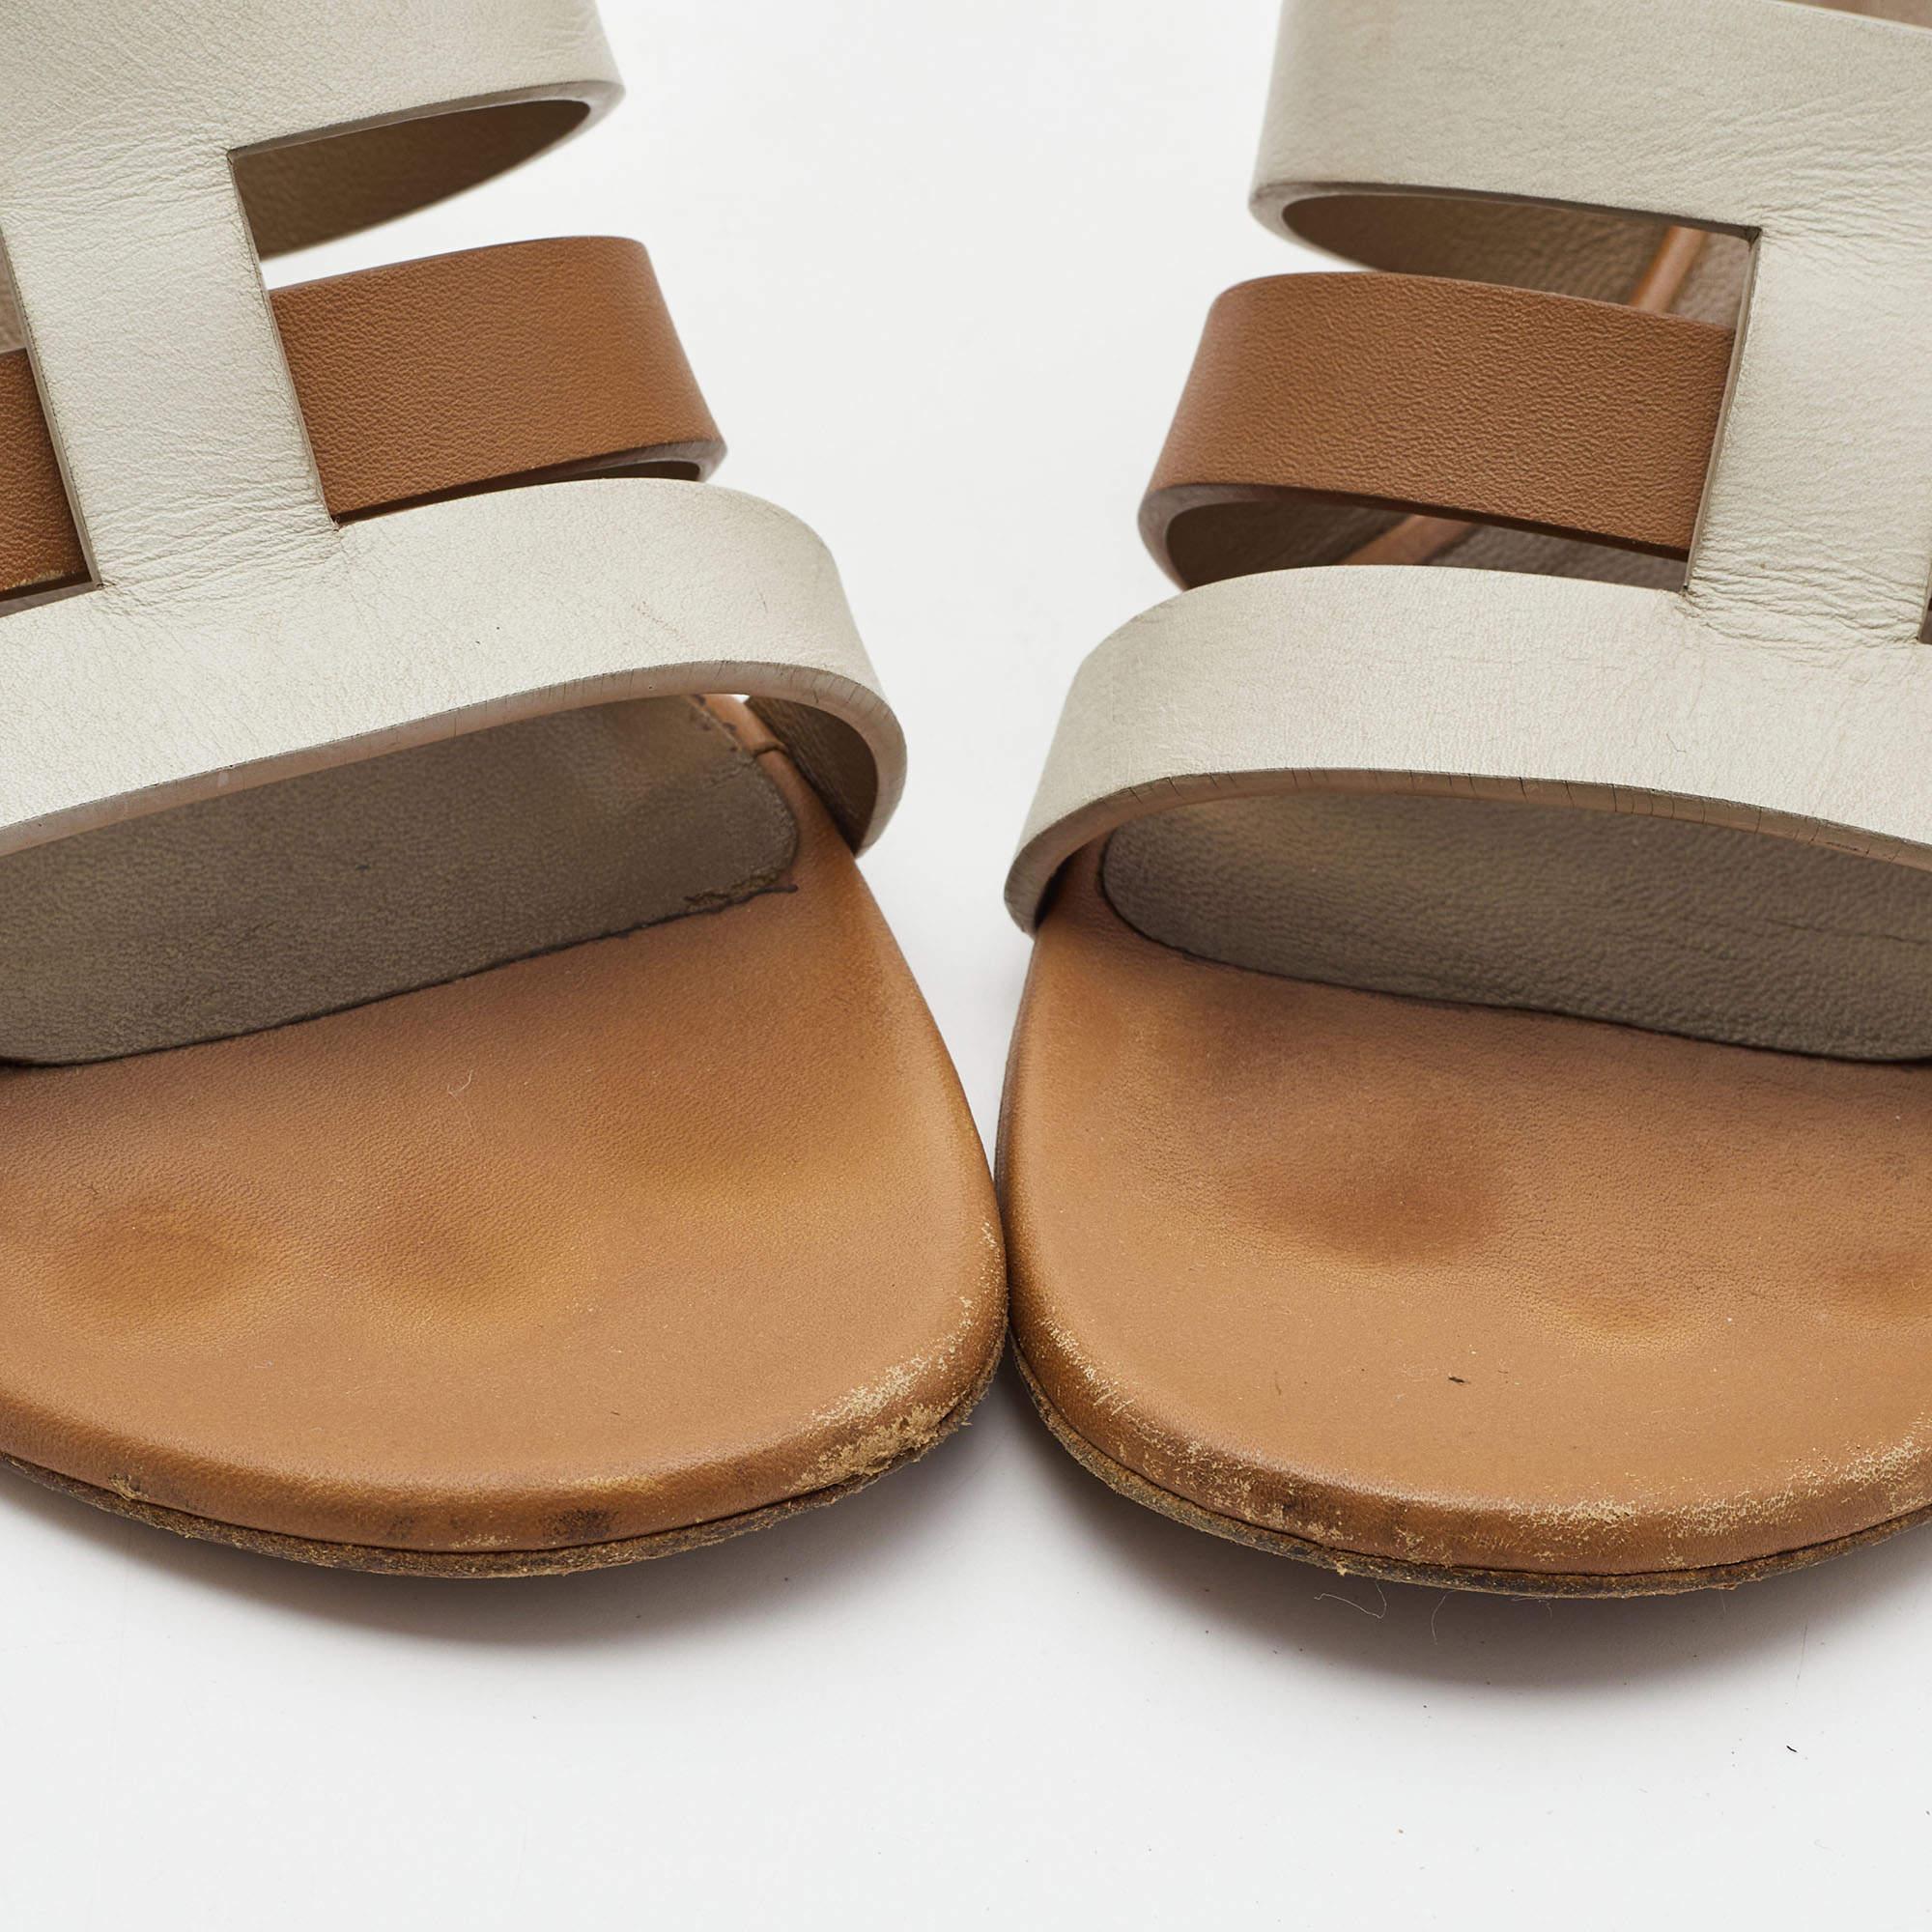 Hermes Brown/White Leather Amica Sandals Size 39.5 8